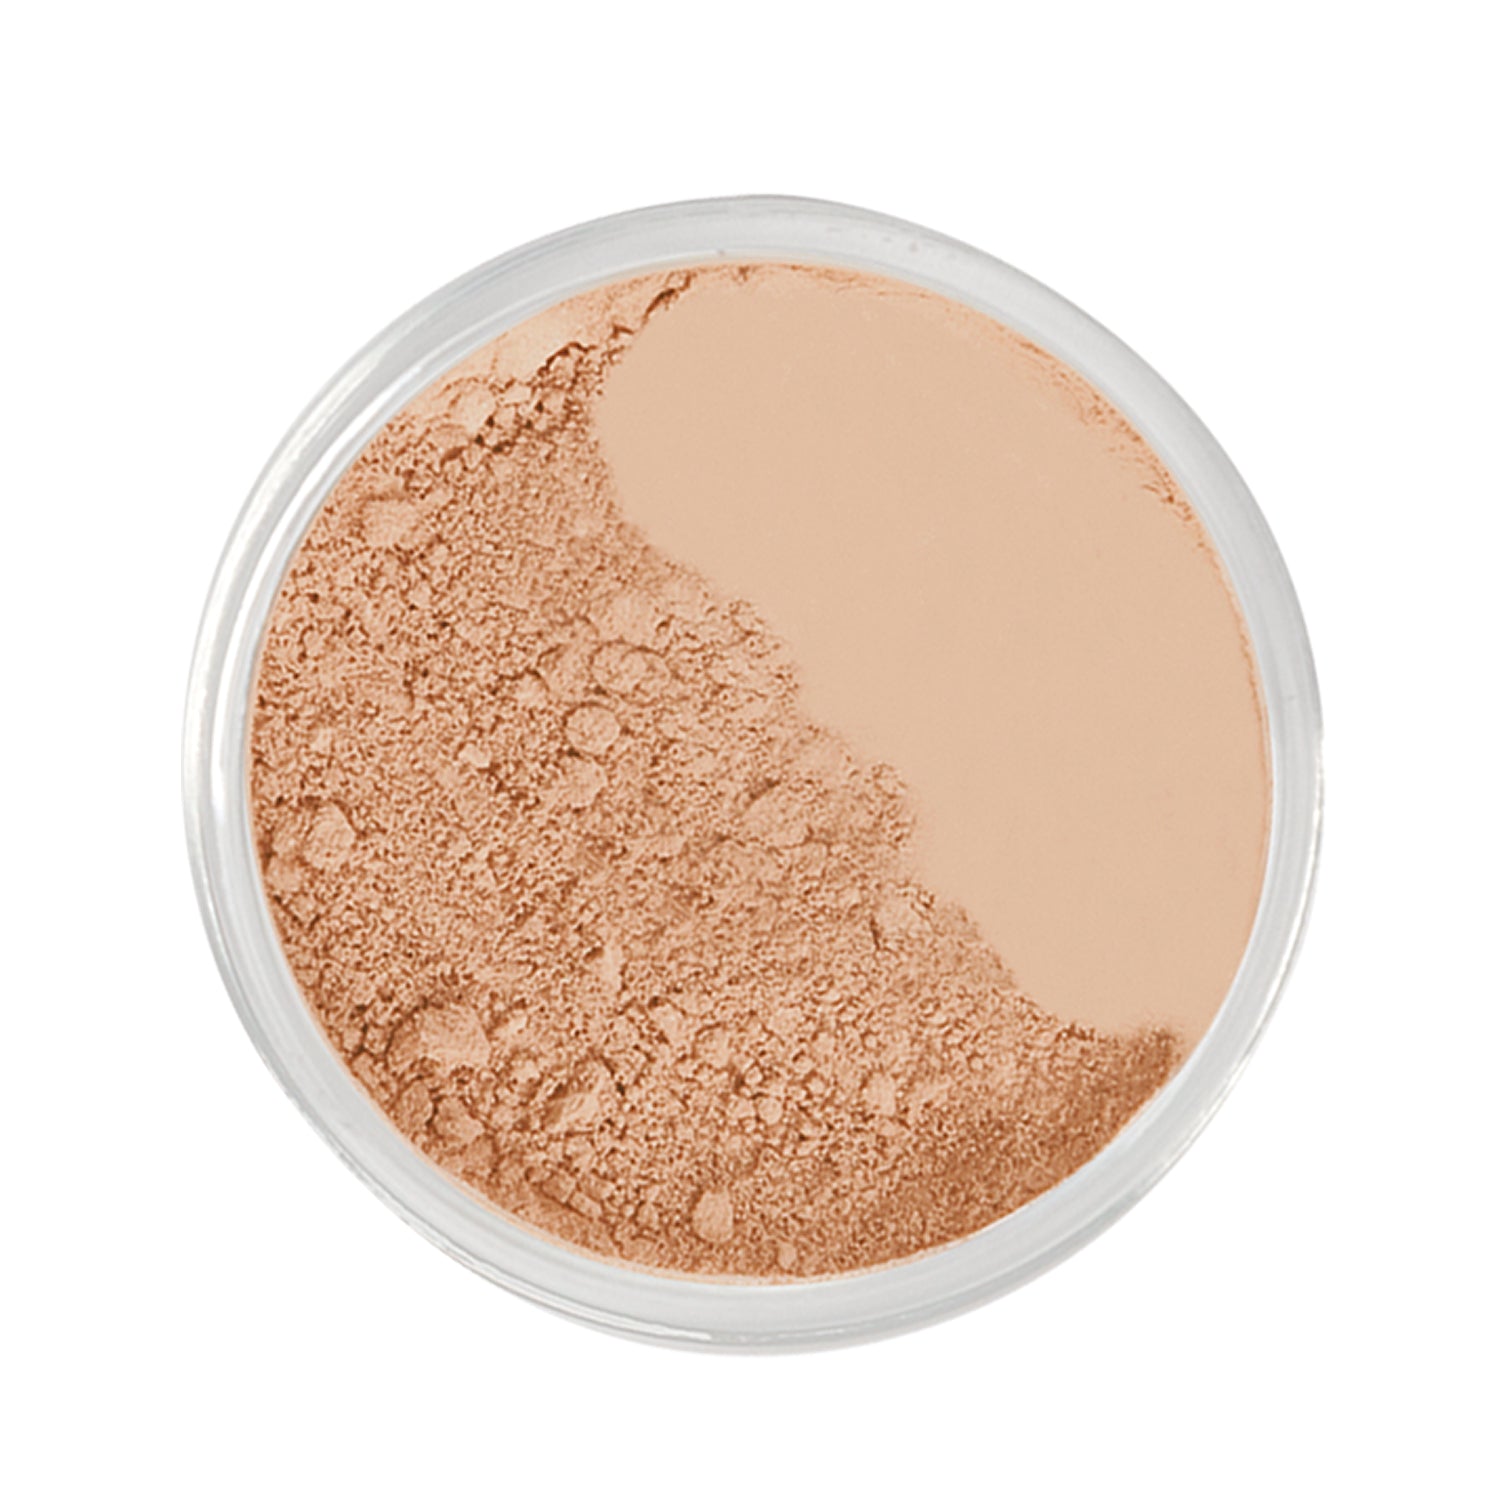 Bodylife Beauty Makeup Natural Mineral Foundation Face Powder Retreat 5g